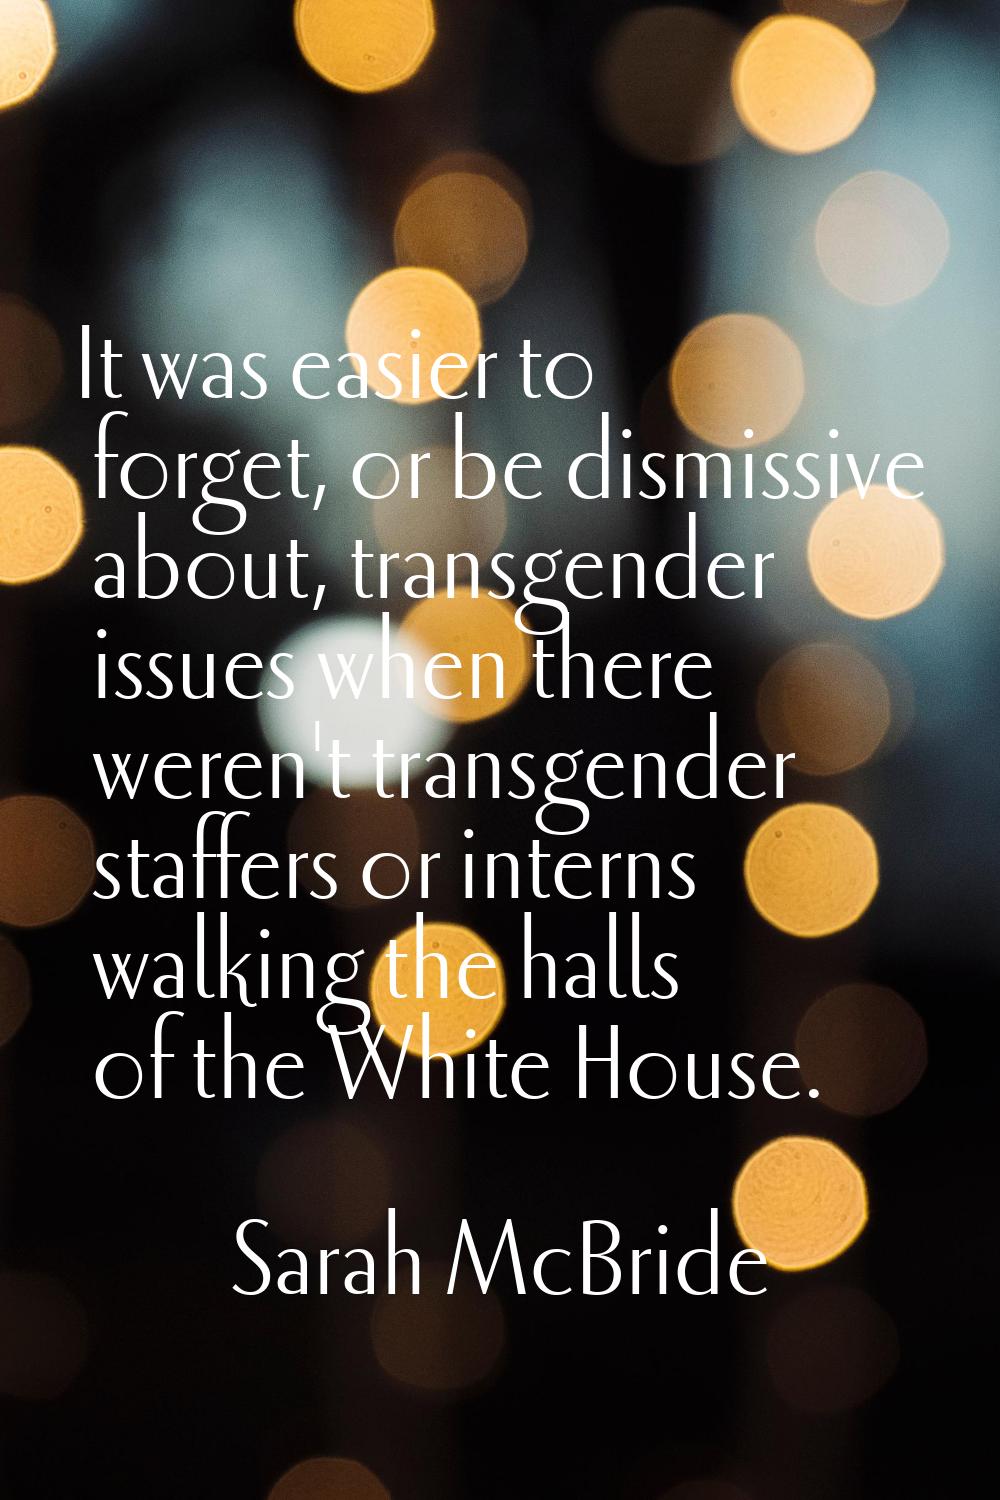 It was easier to forget, or be dismissive about, transgender issues when there weren't transgender 